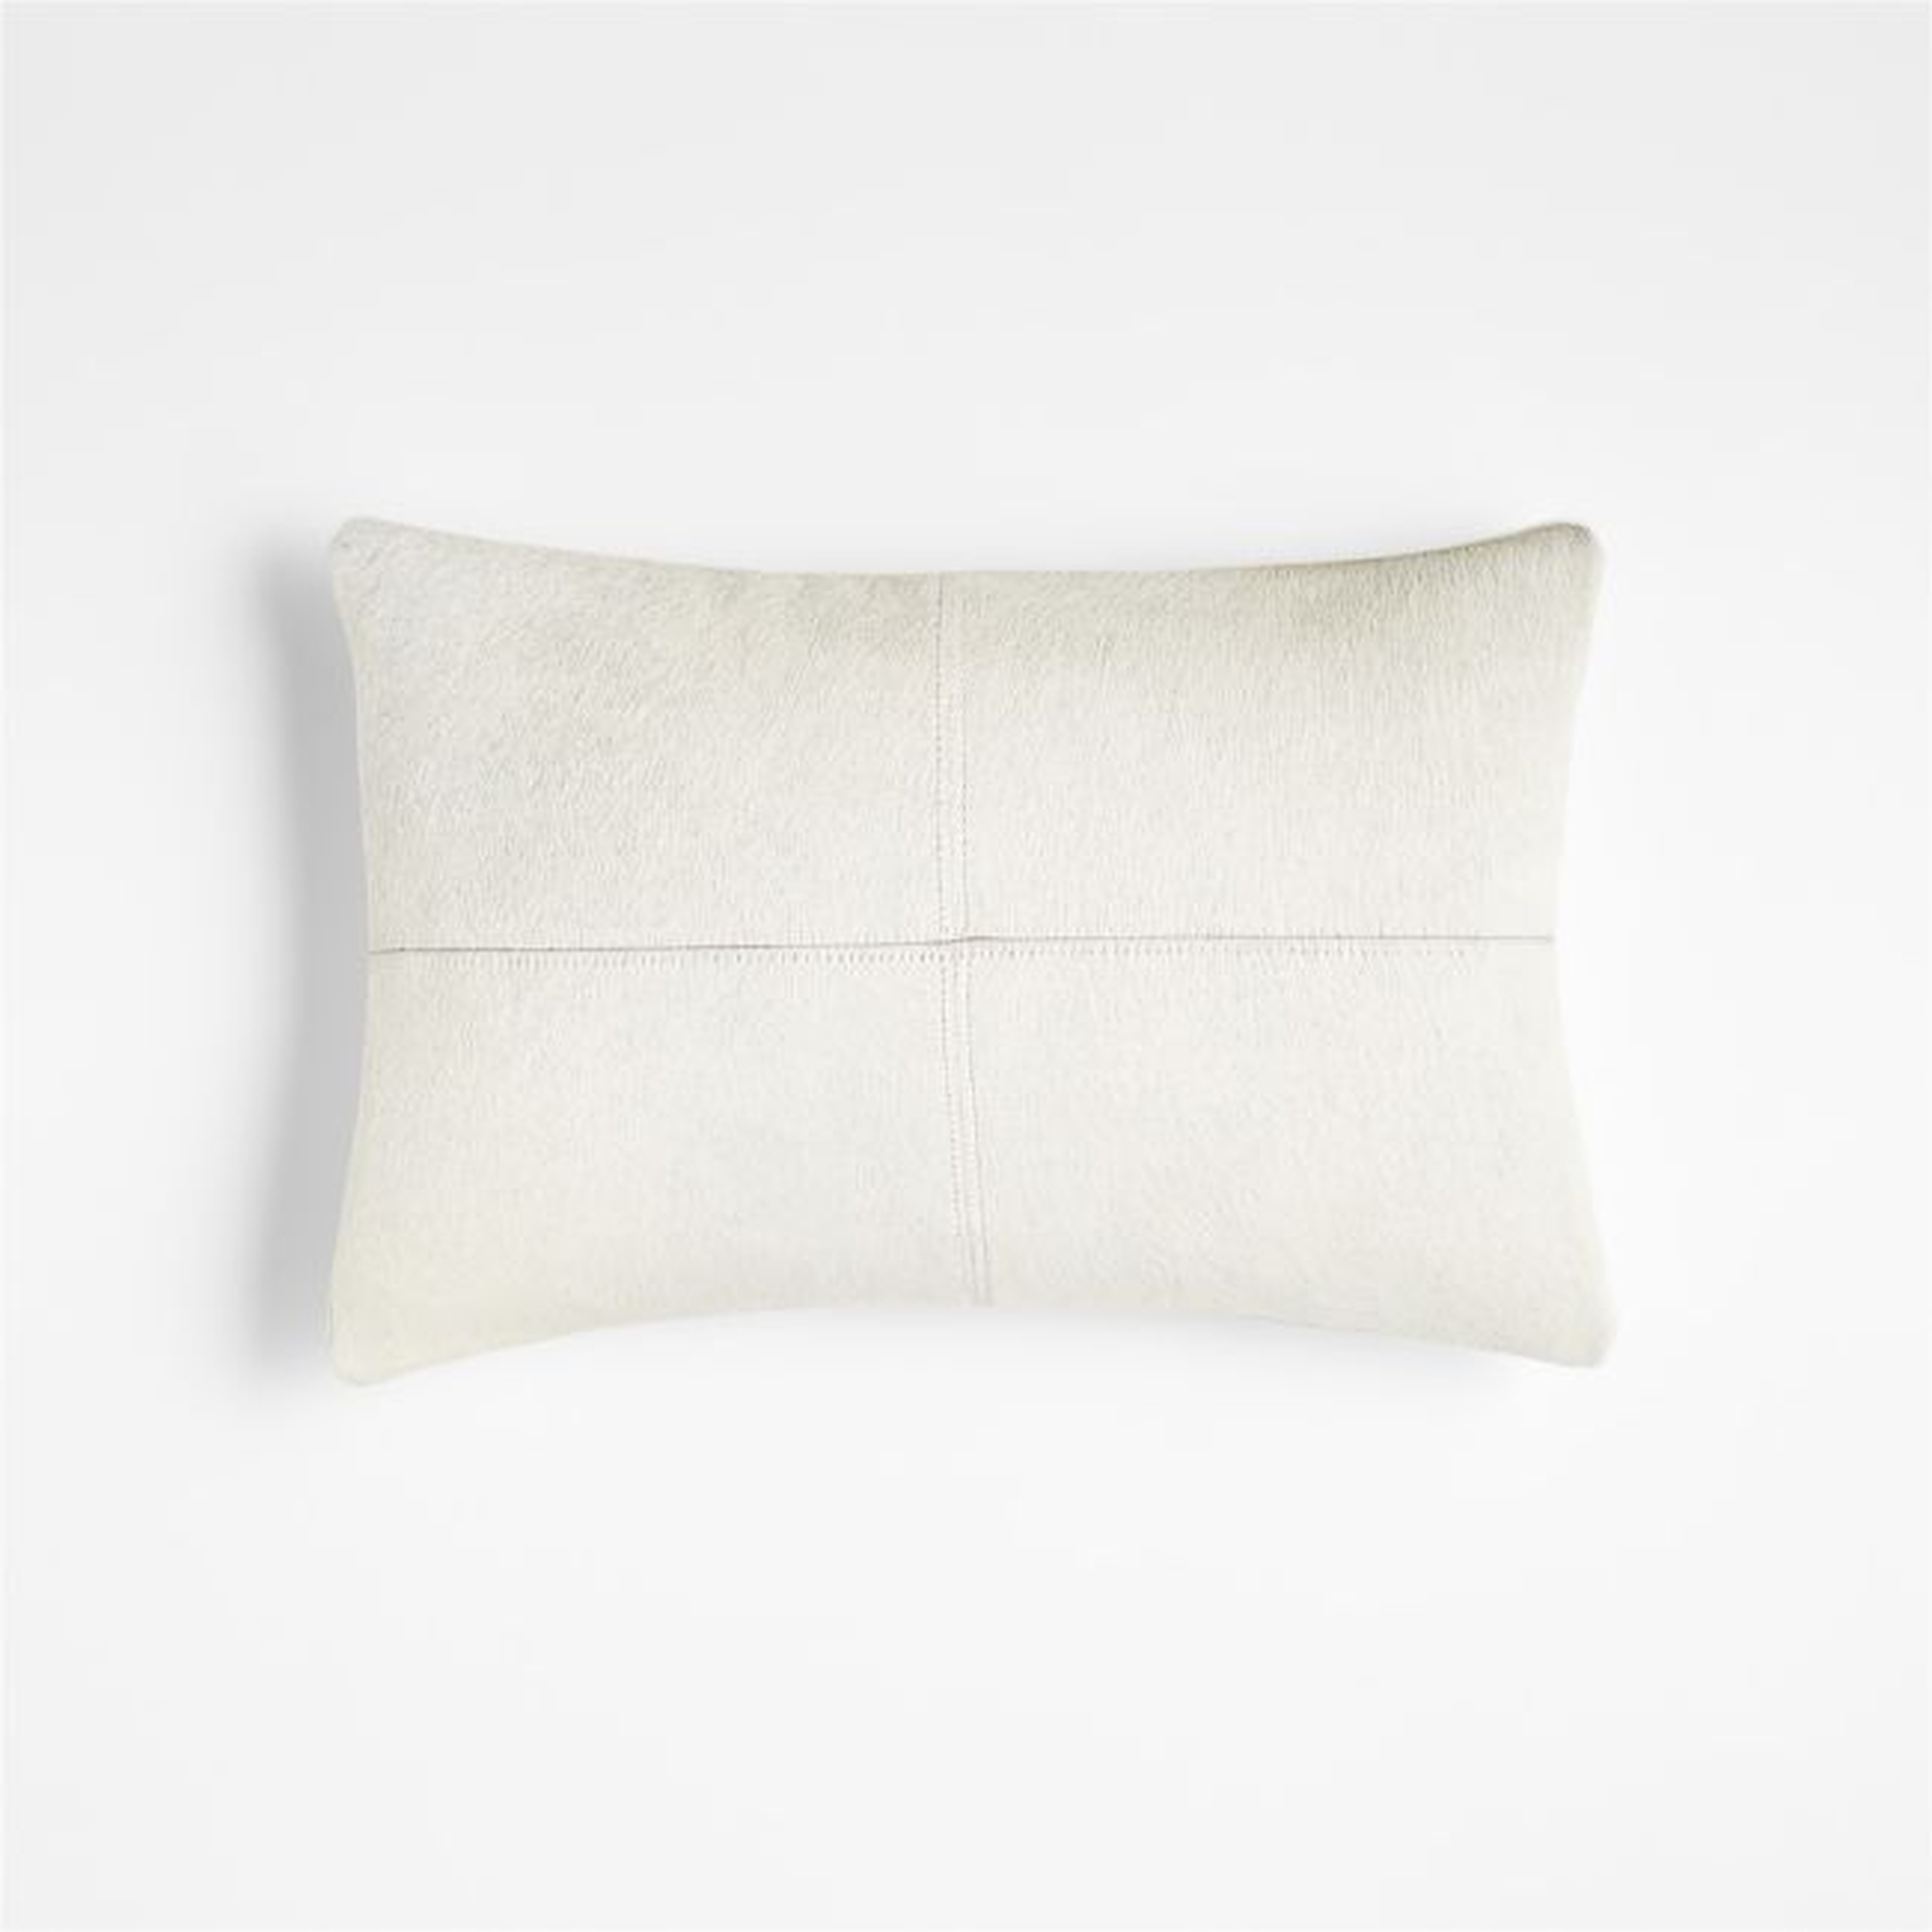 Valona 18"x12" White Cowhide Throw Pillow Cover with Feather Insert - Crate and Barrel